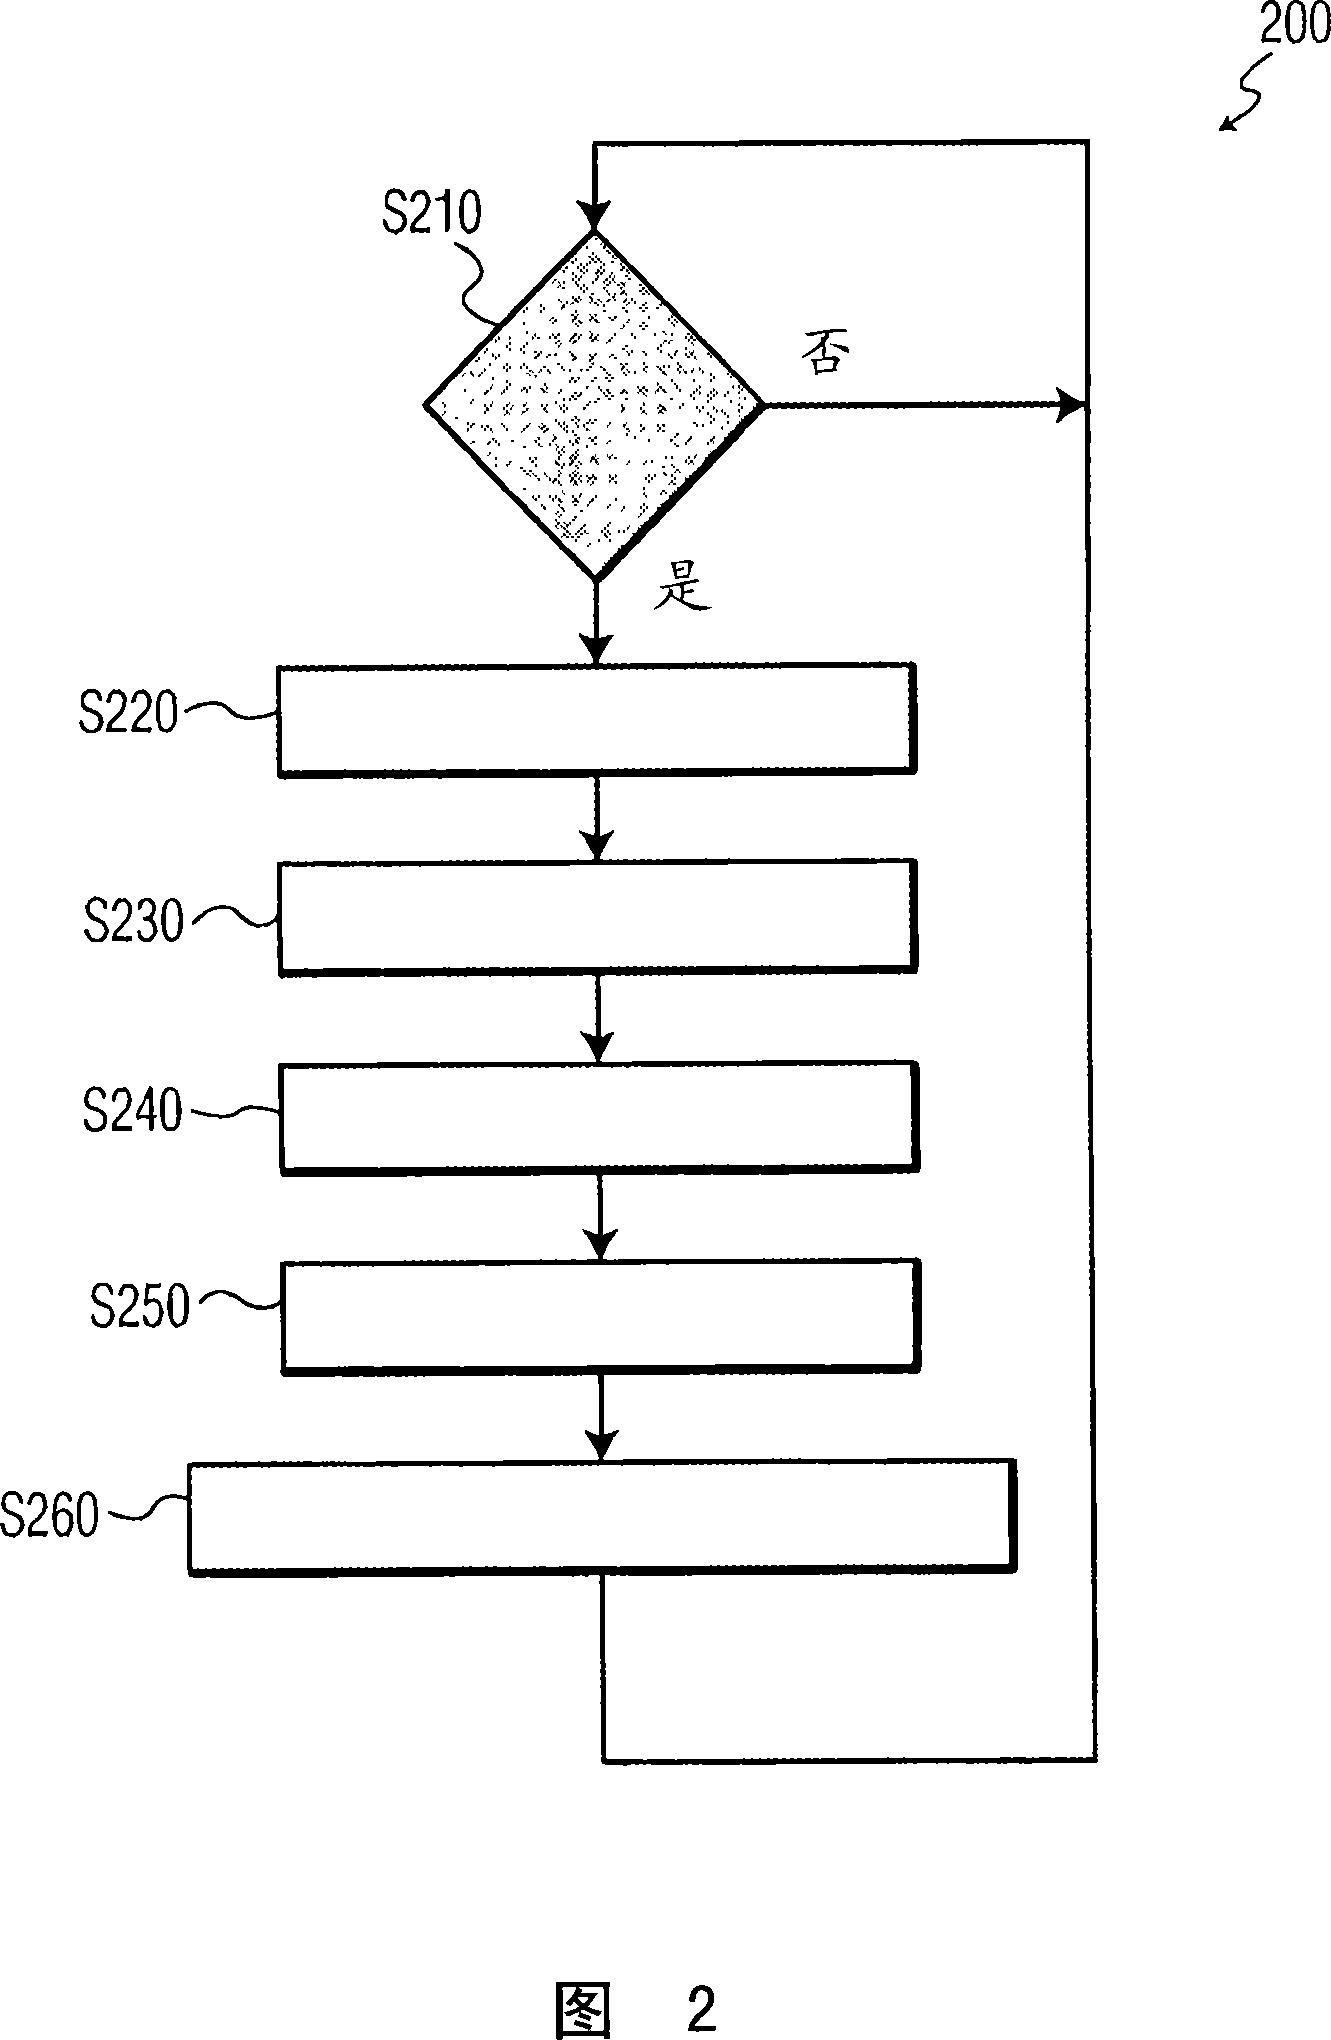 In-situ data collection architecture for computer-aided diagnosis